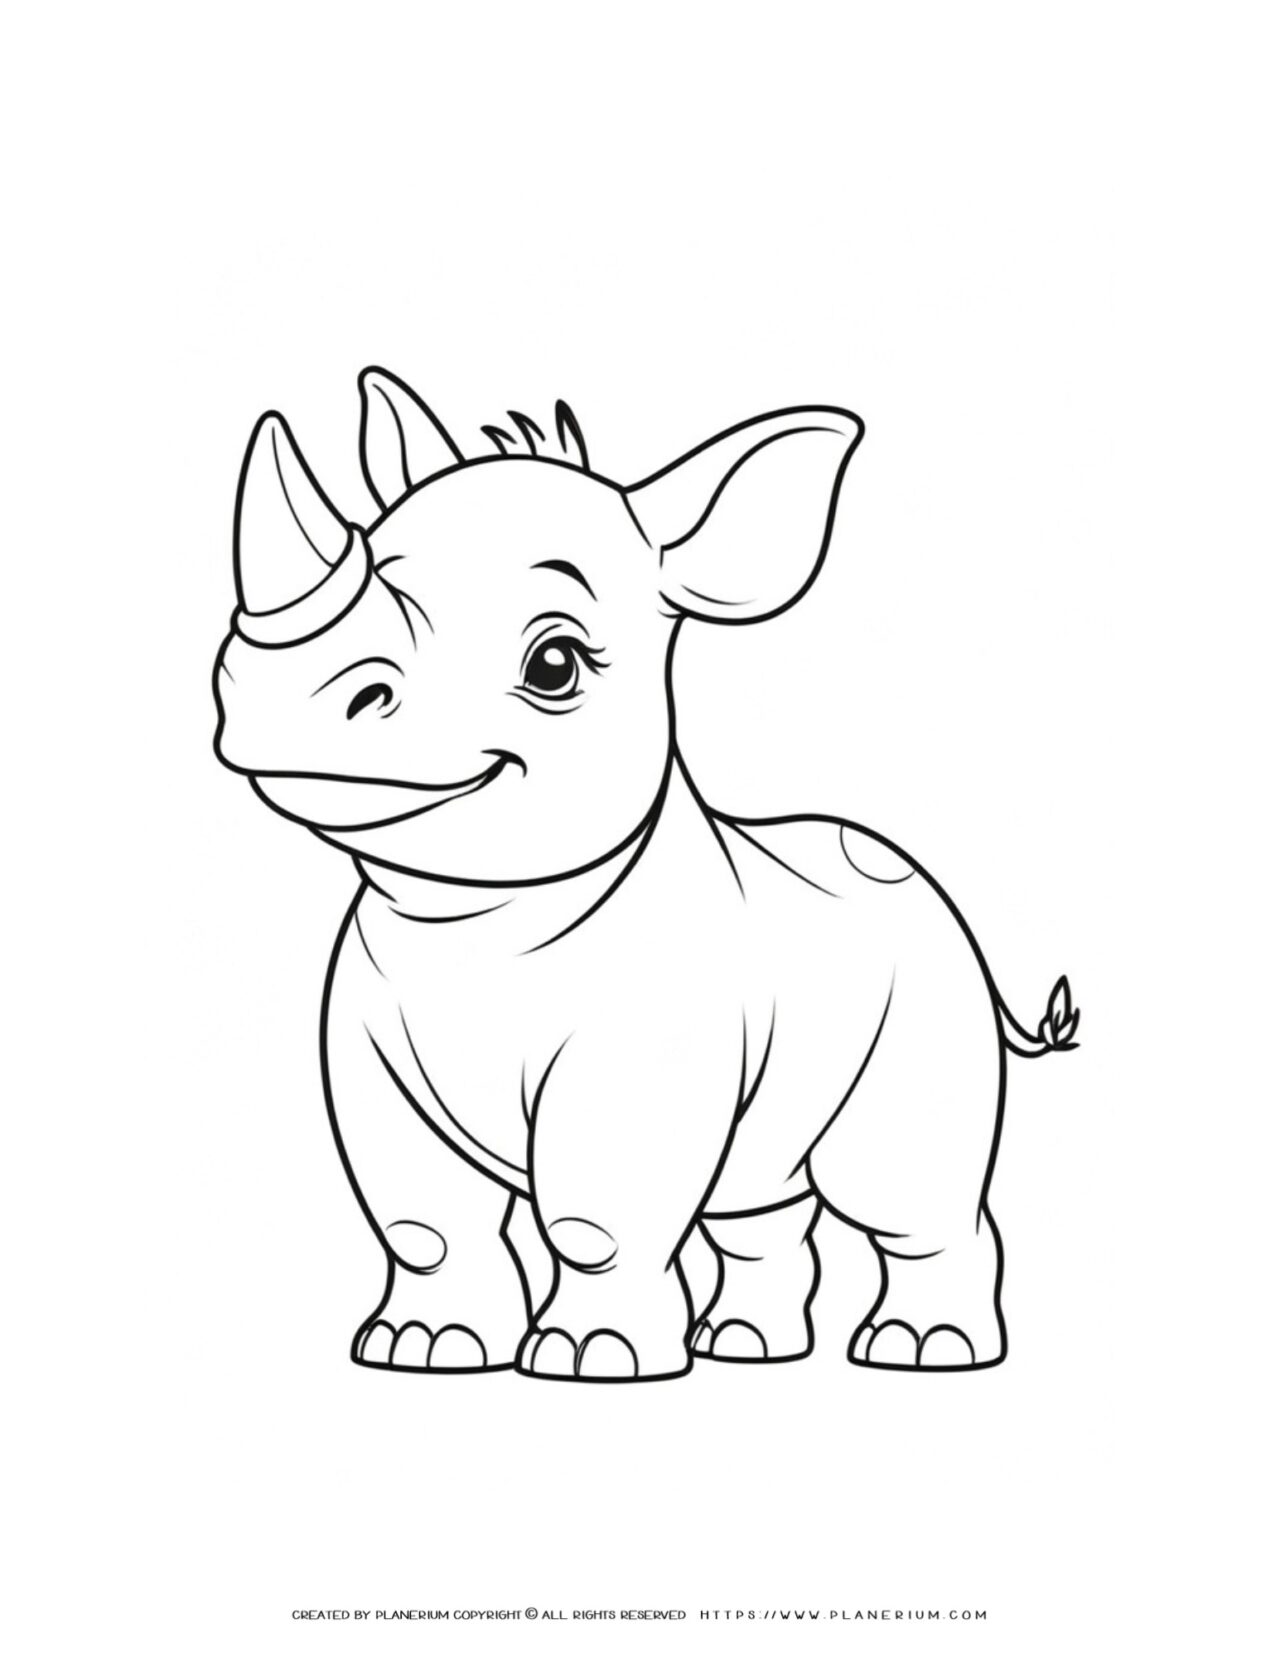 cute-happy-rhinoceros-outline-animal-coloring-page-for-kids